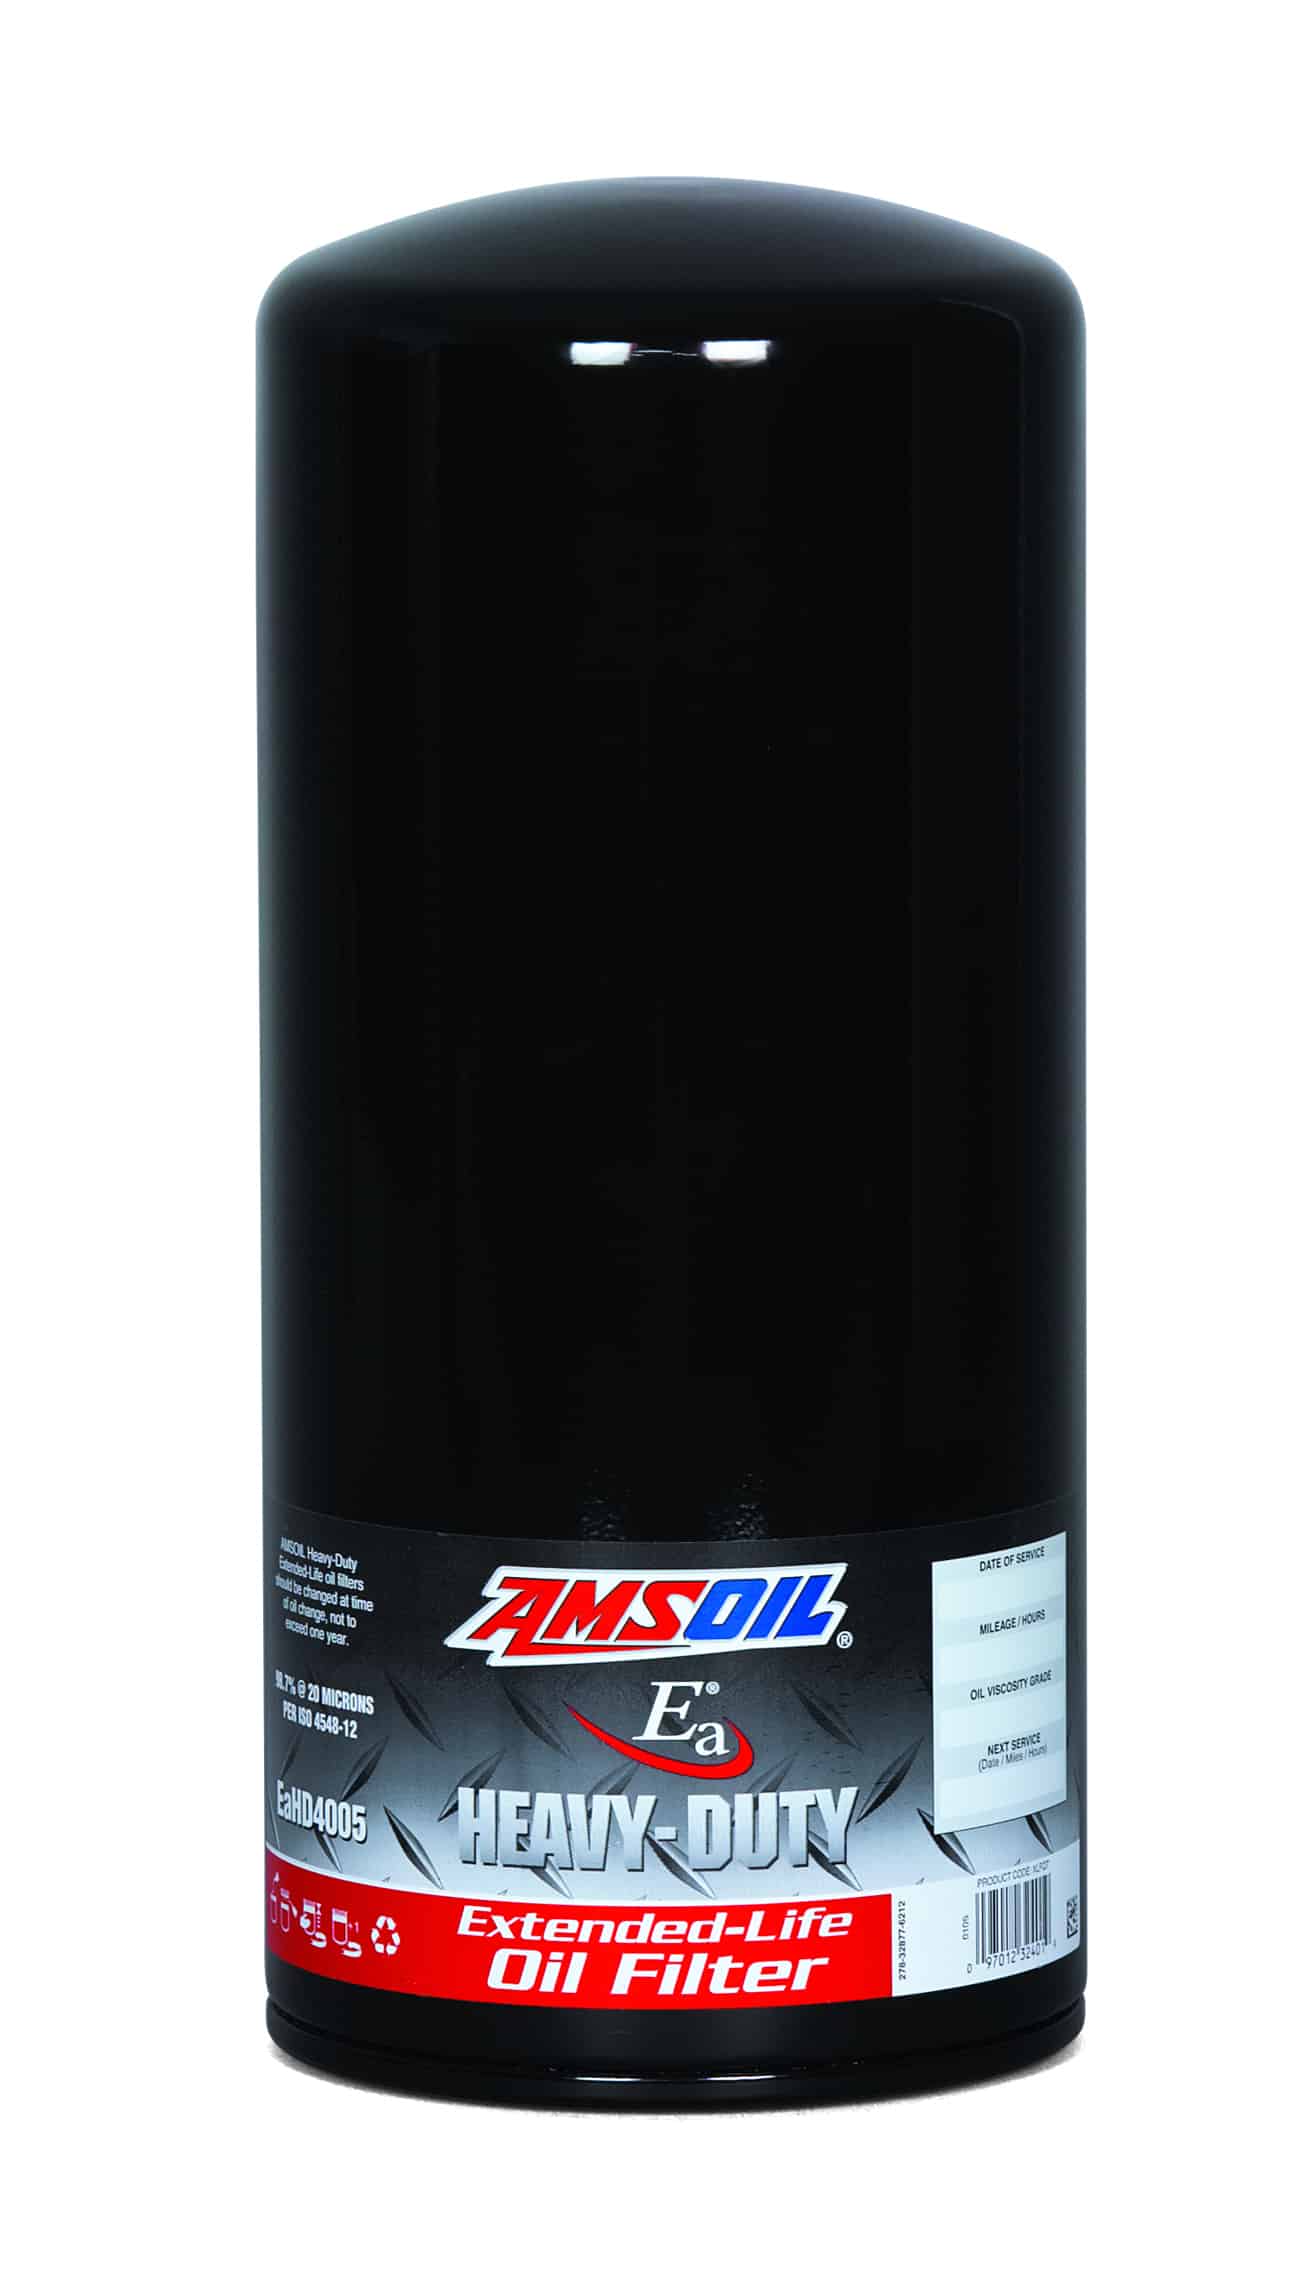 A can of AMSOIL Ea Heavy-Duty Extended-Life Oil Filters, formulated to provide great filtering efficiency for heavy-duty on- and off-road diesel, gasoline applications.